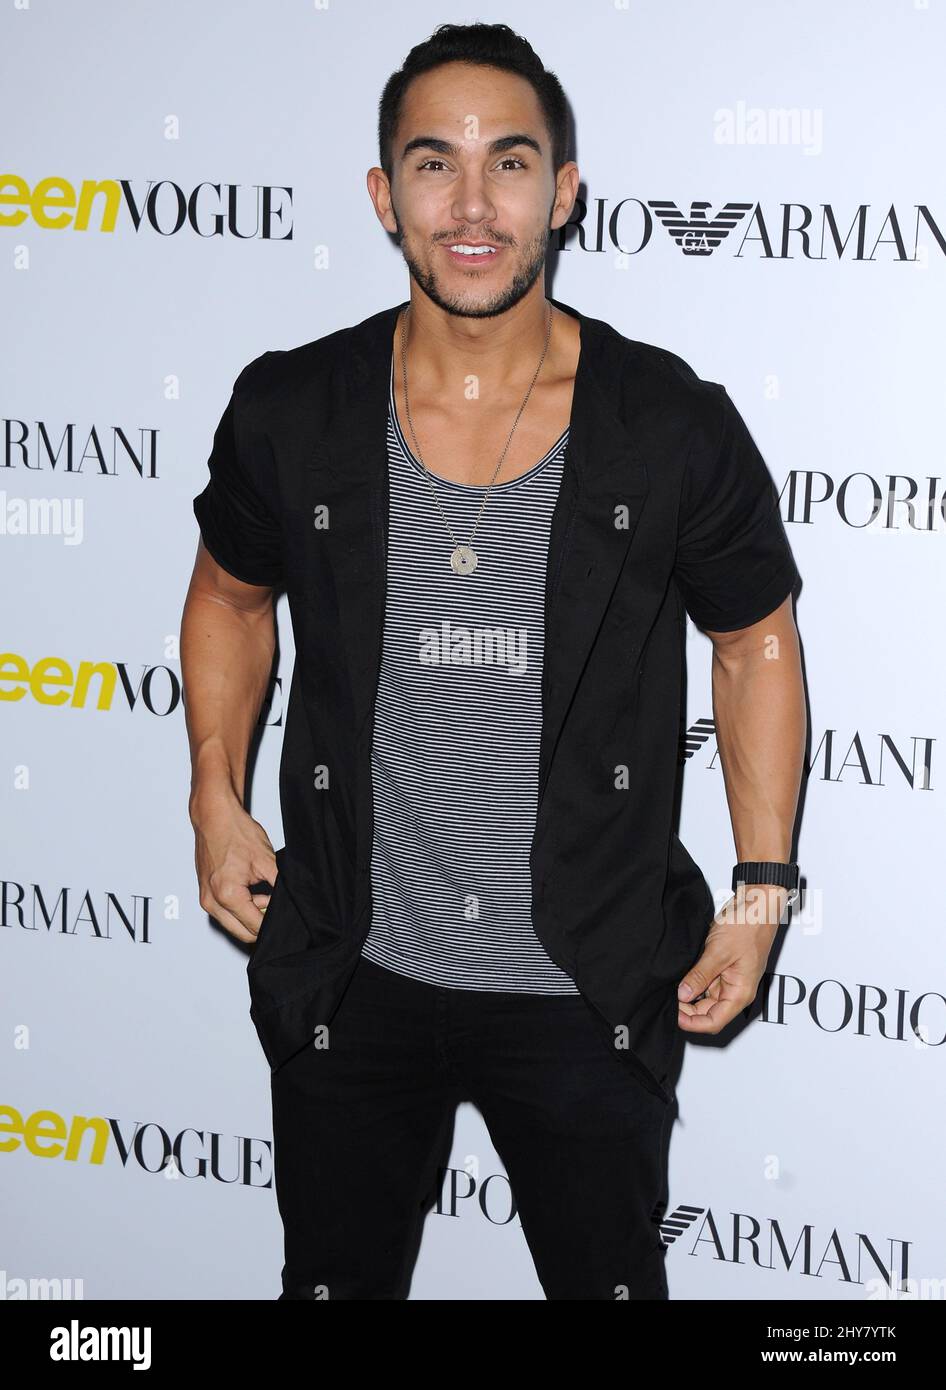 Carlos Pena attending the 13th Annual Teen Vogue Young Hollywood party in Los Angeles, California. Stock Photo